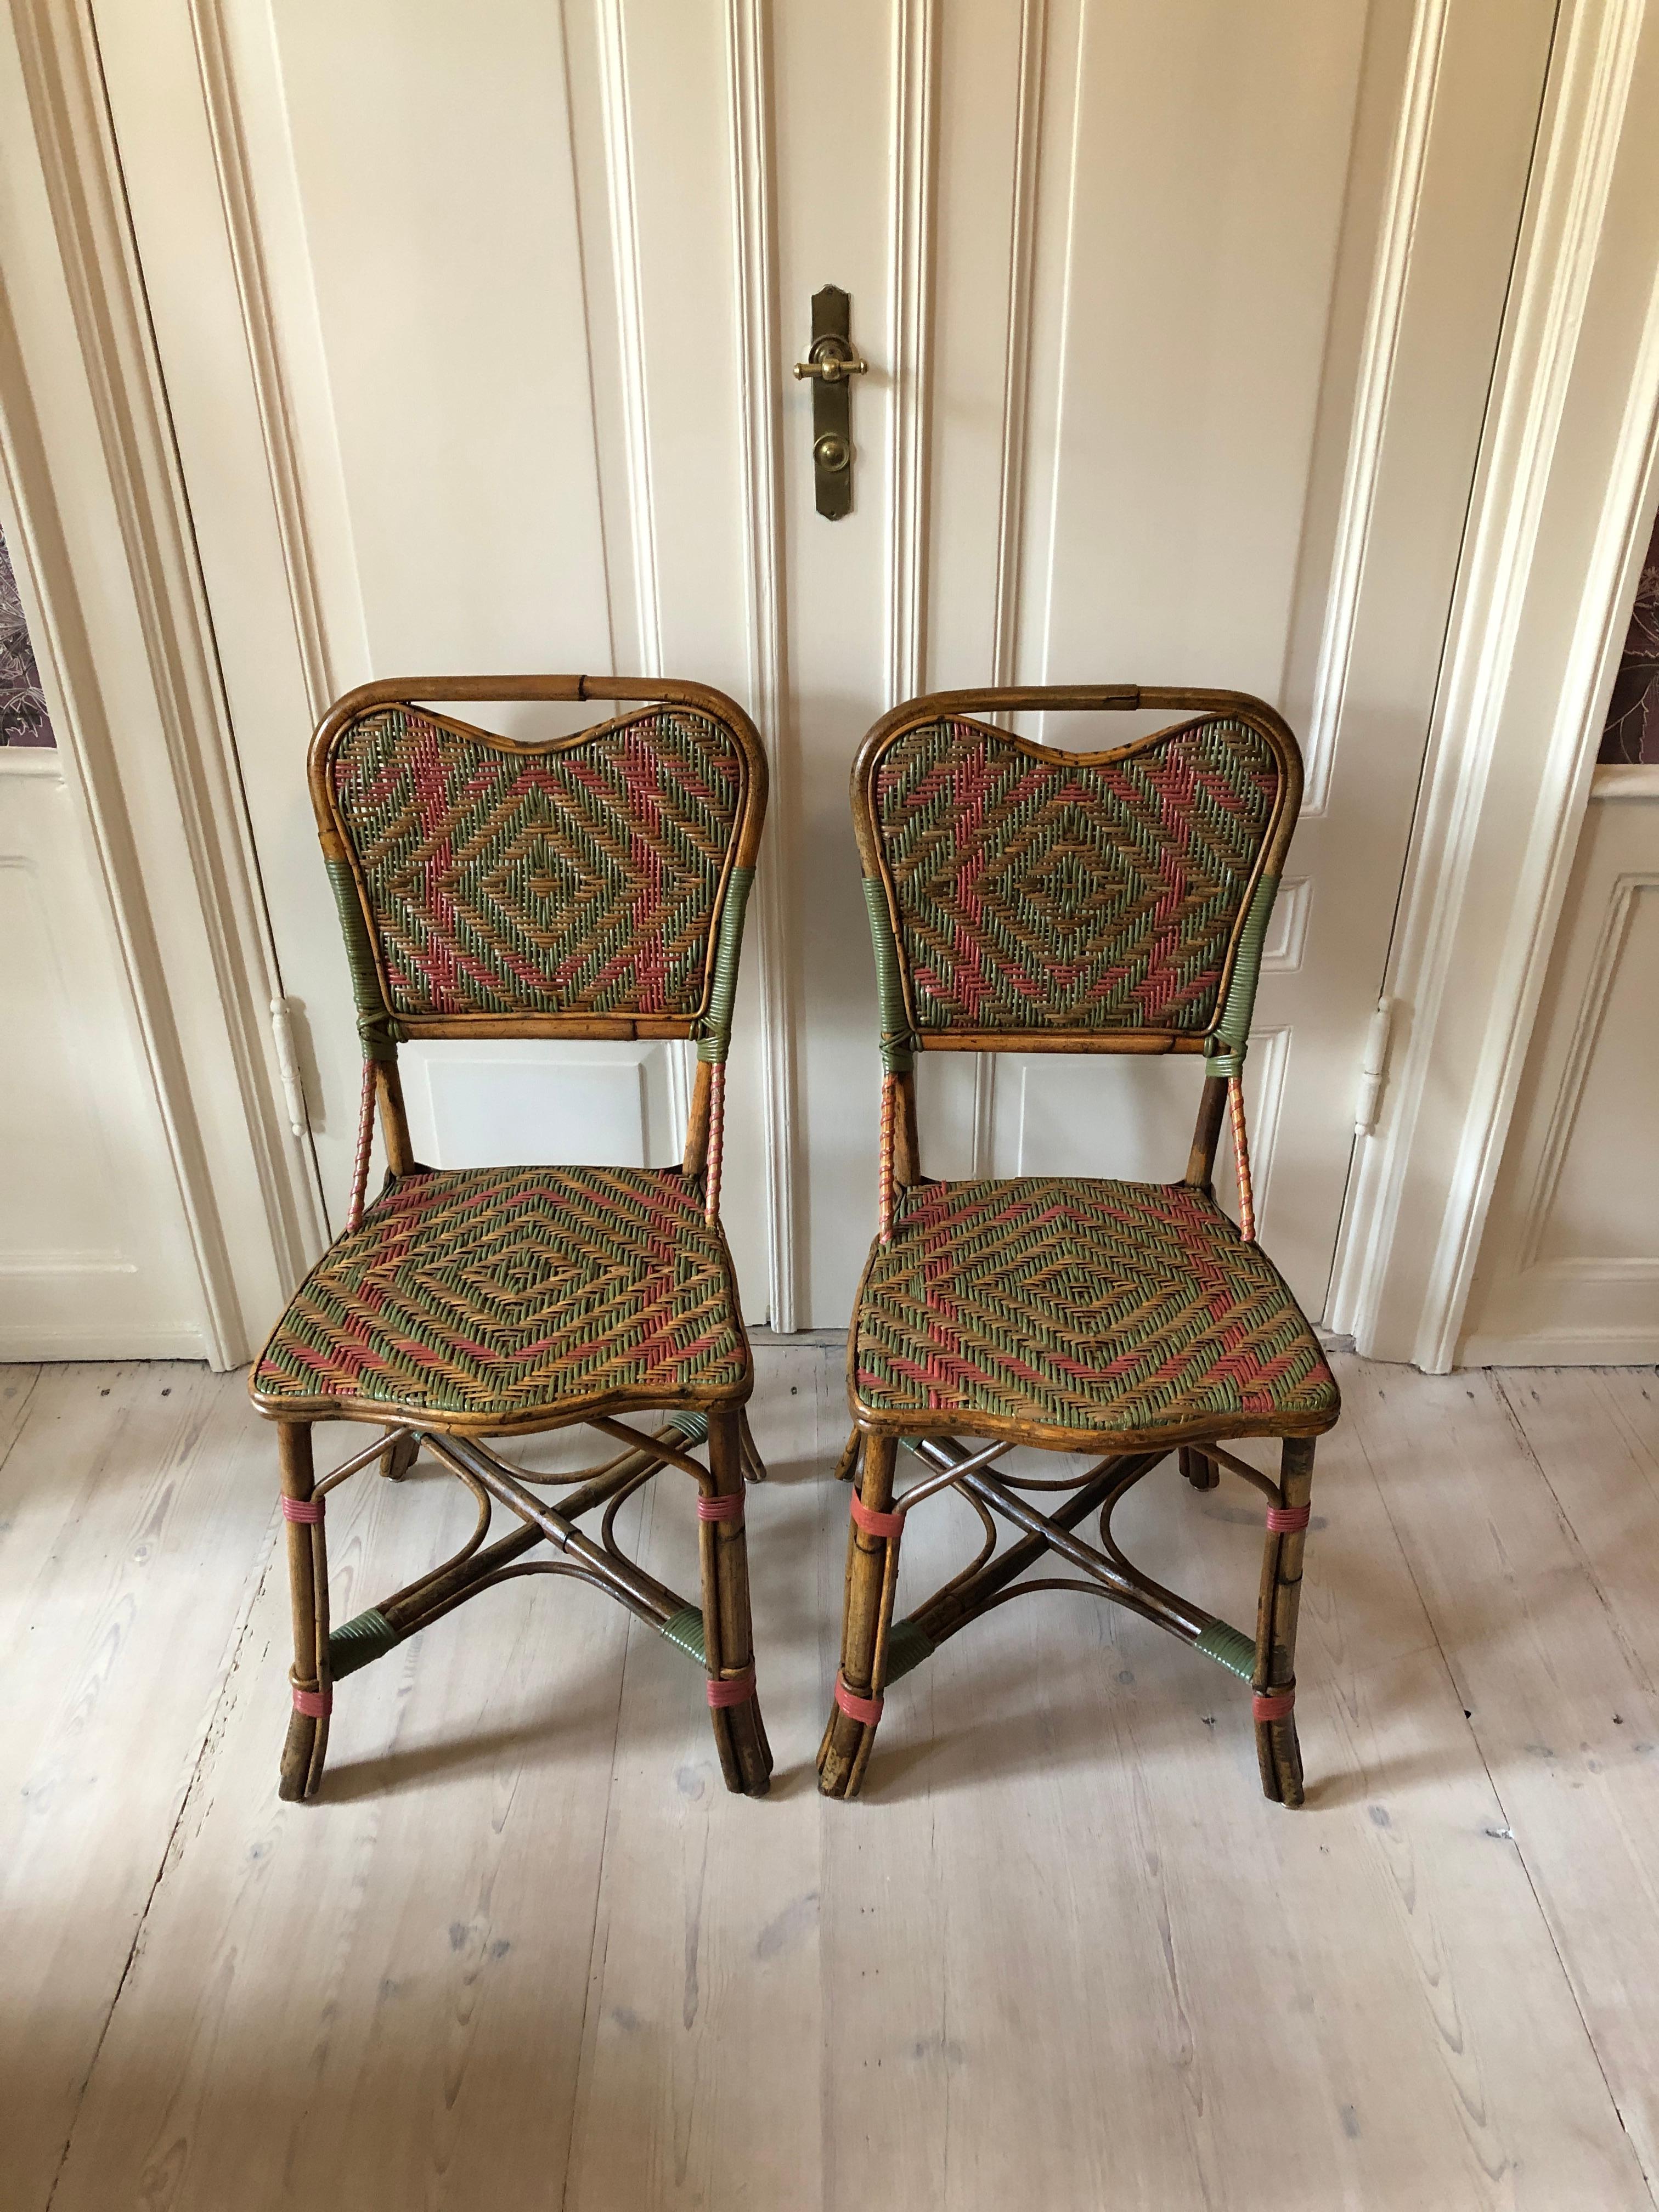 French Vintage Rattan Chairs with Elegant Coral and Green Woven Details, France, 1930s